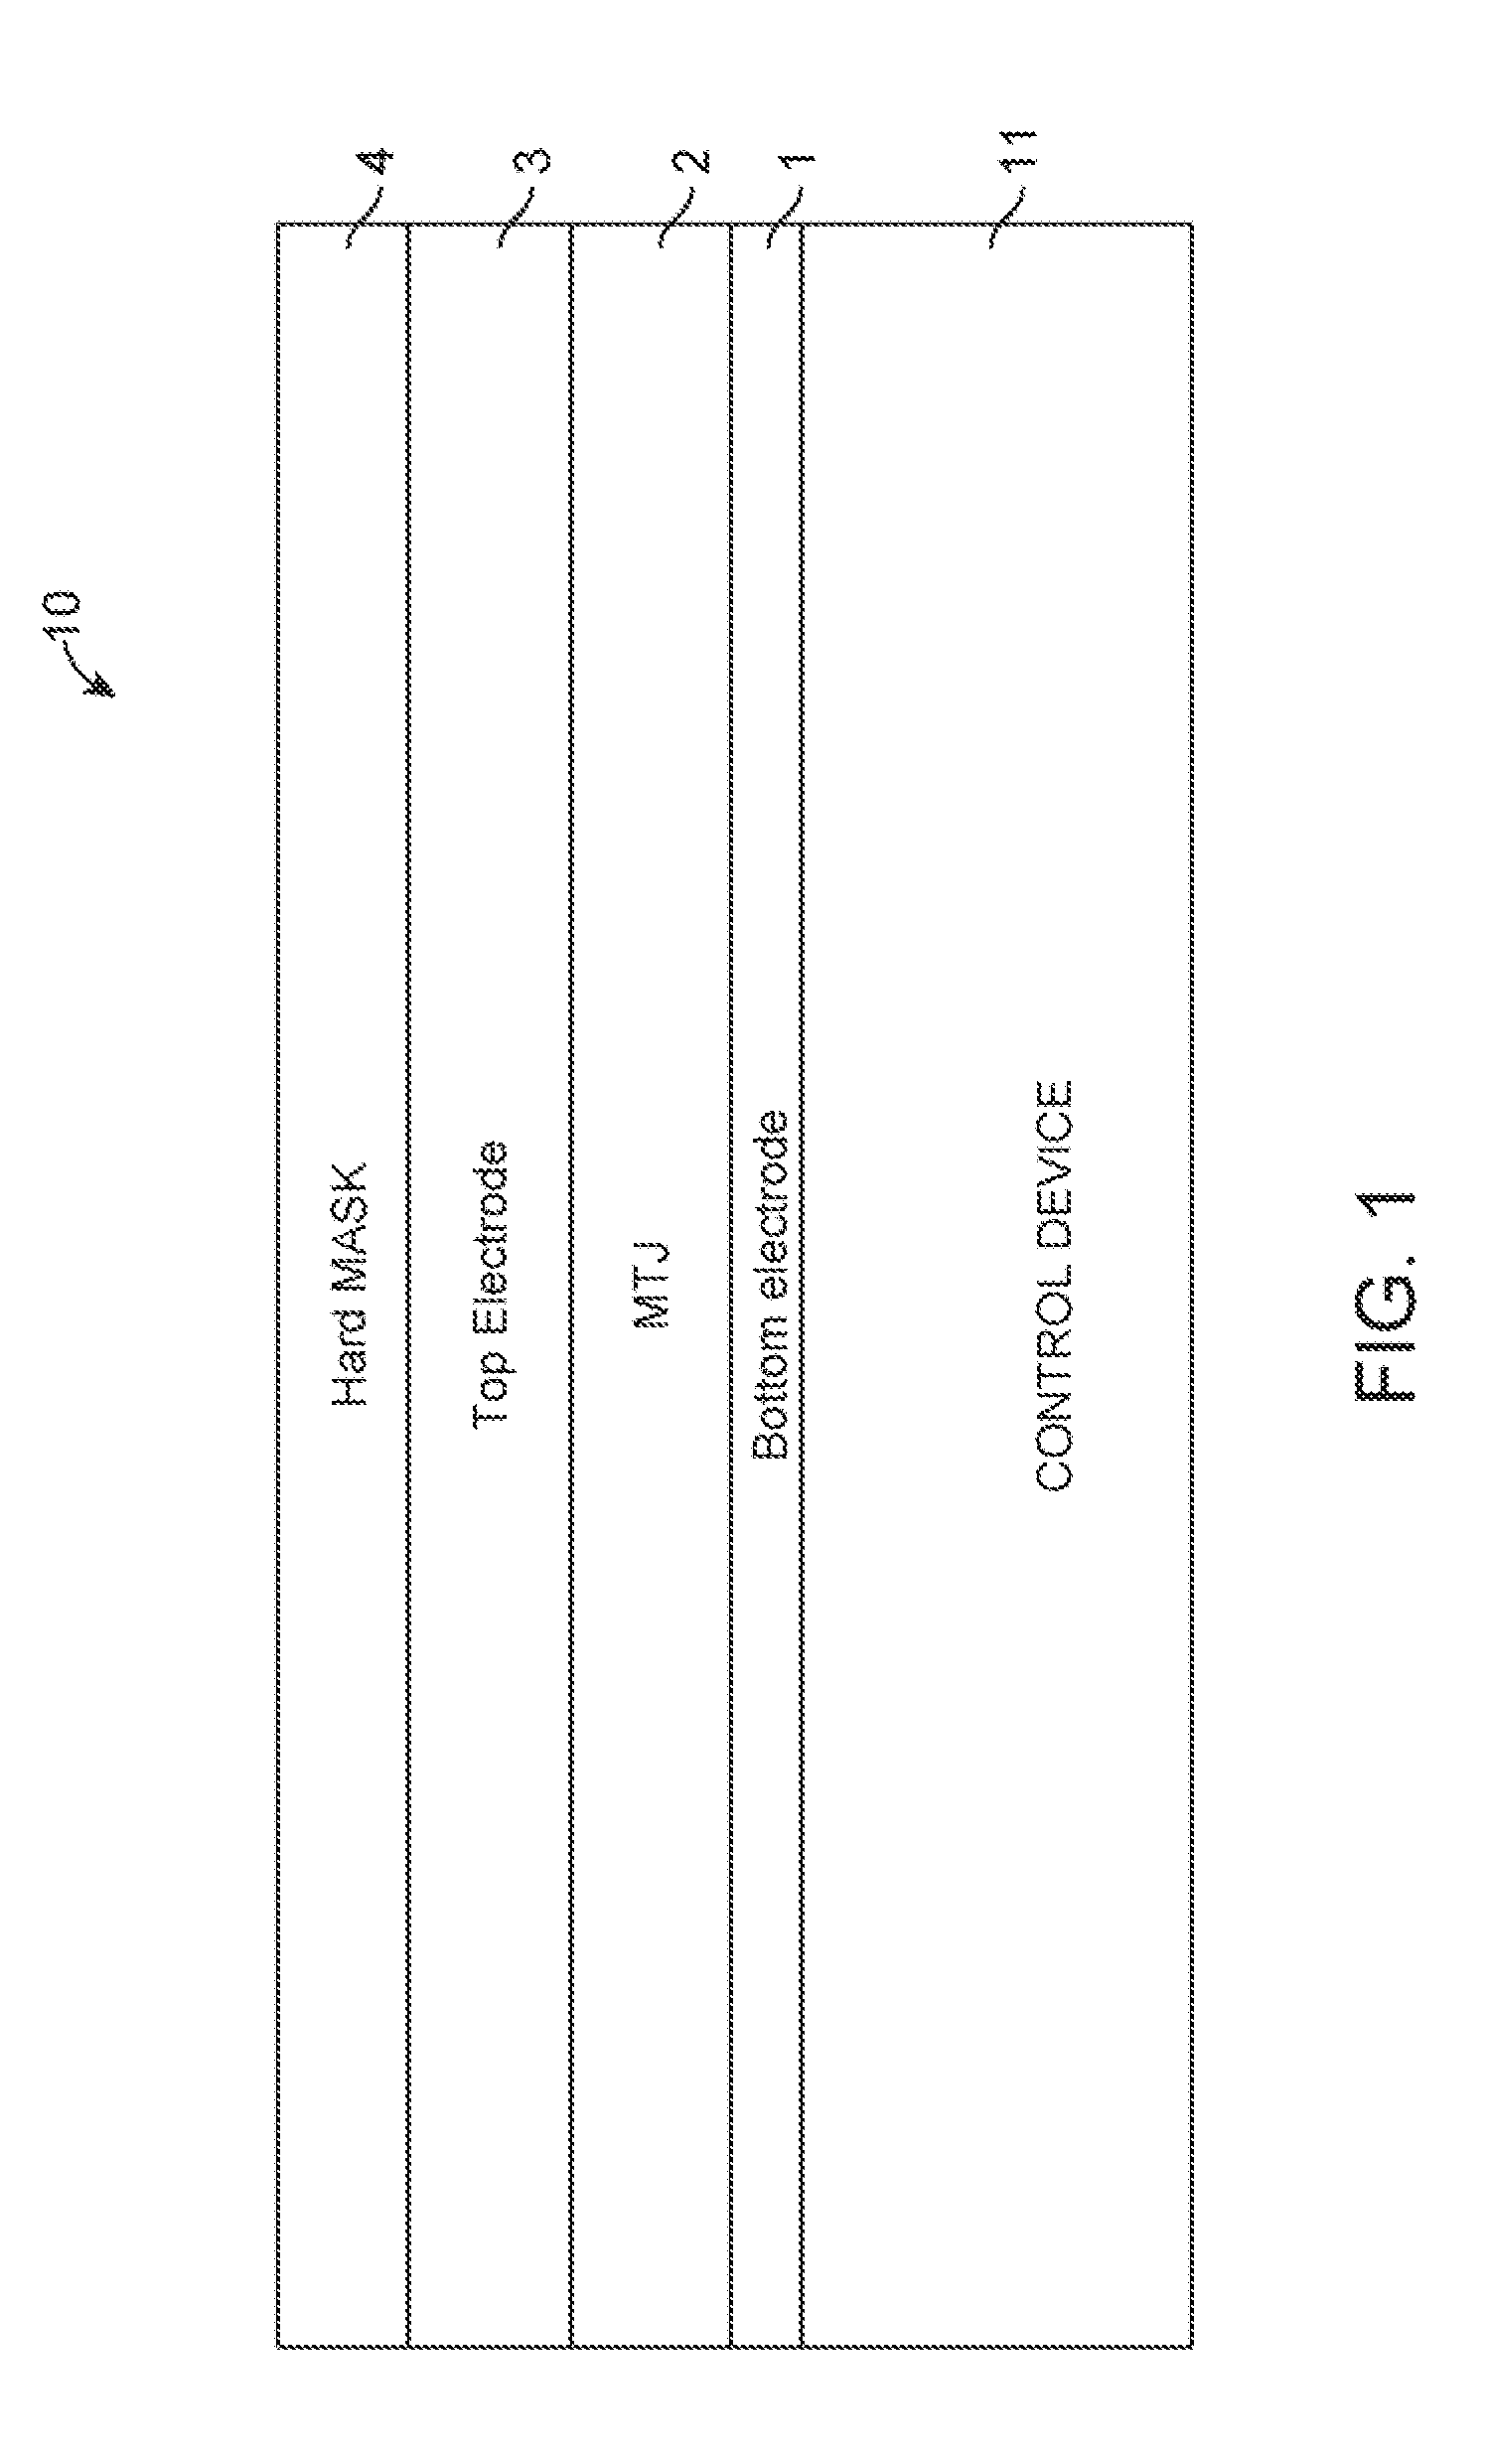 Vialess memory structure and method of manufacturing same